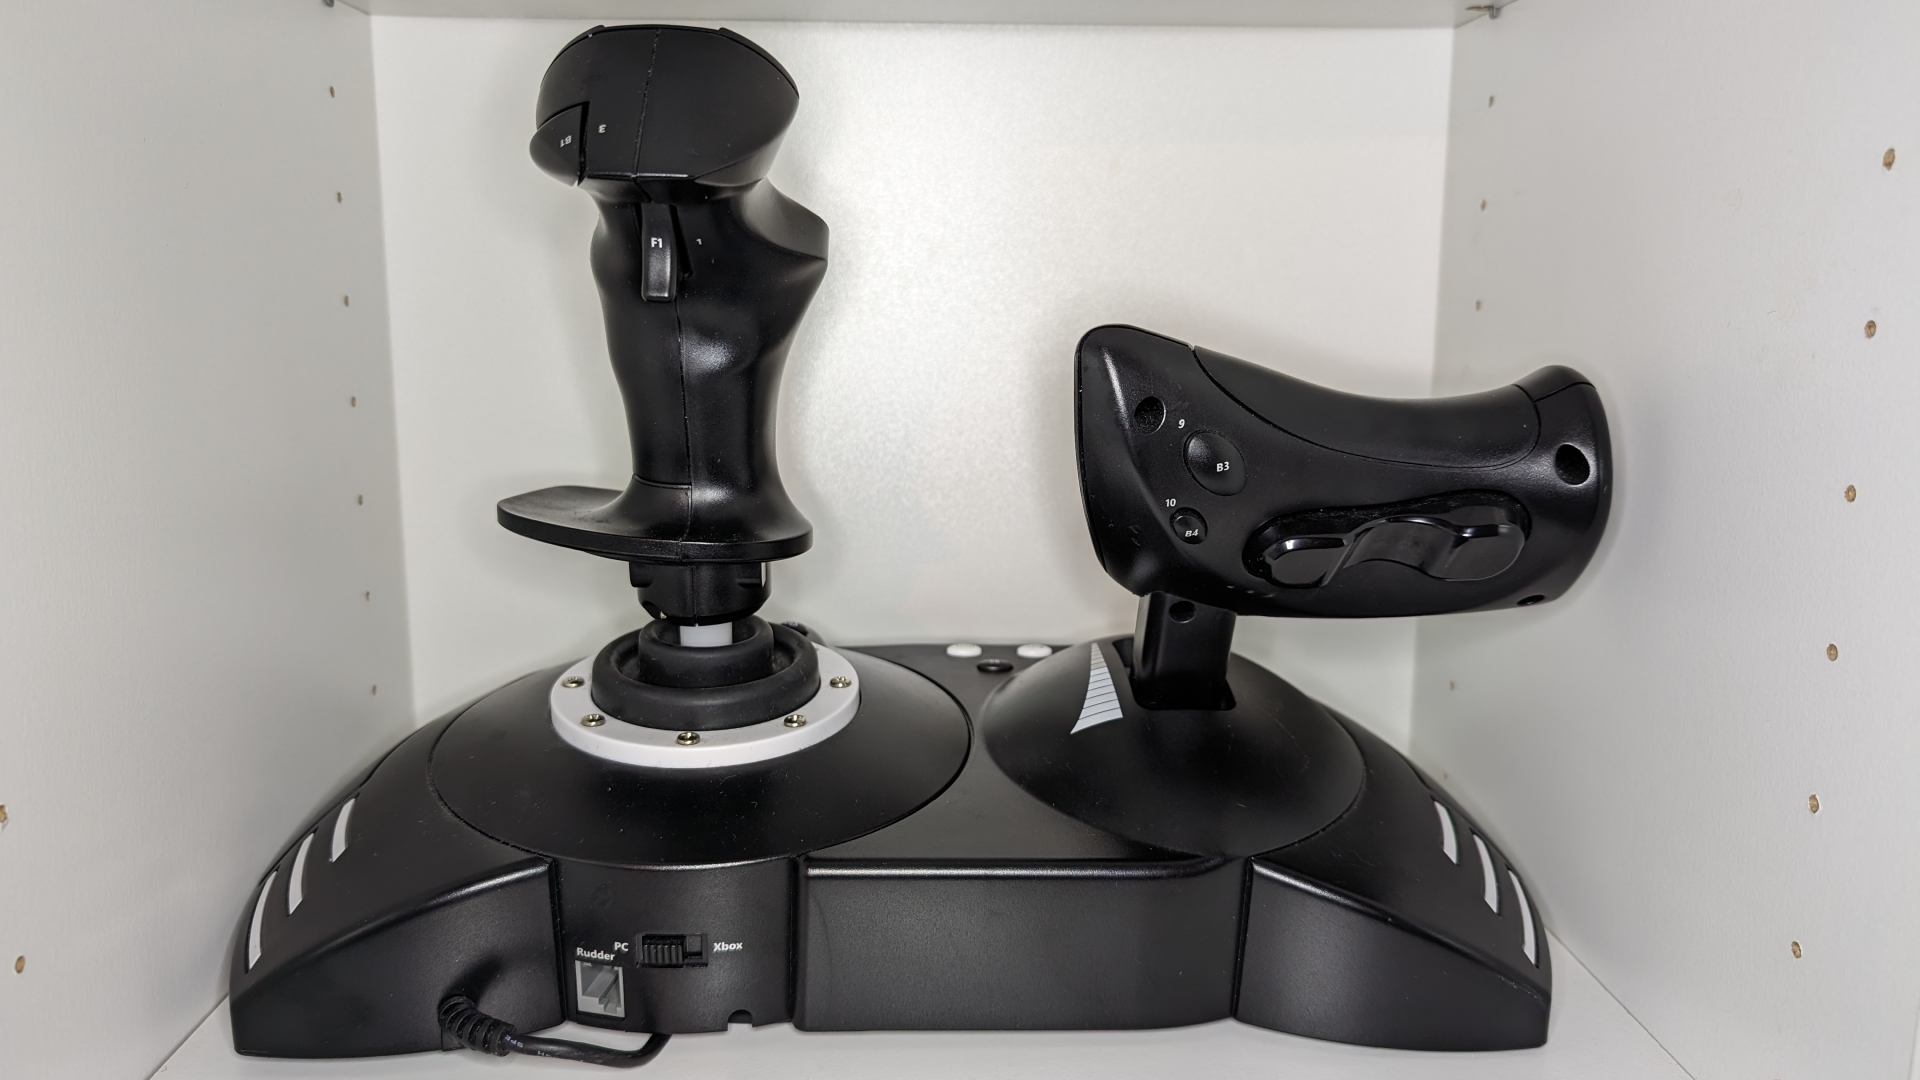 Thrustmaster HOTAS flight stick review image showing the controller from behind.